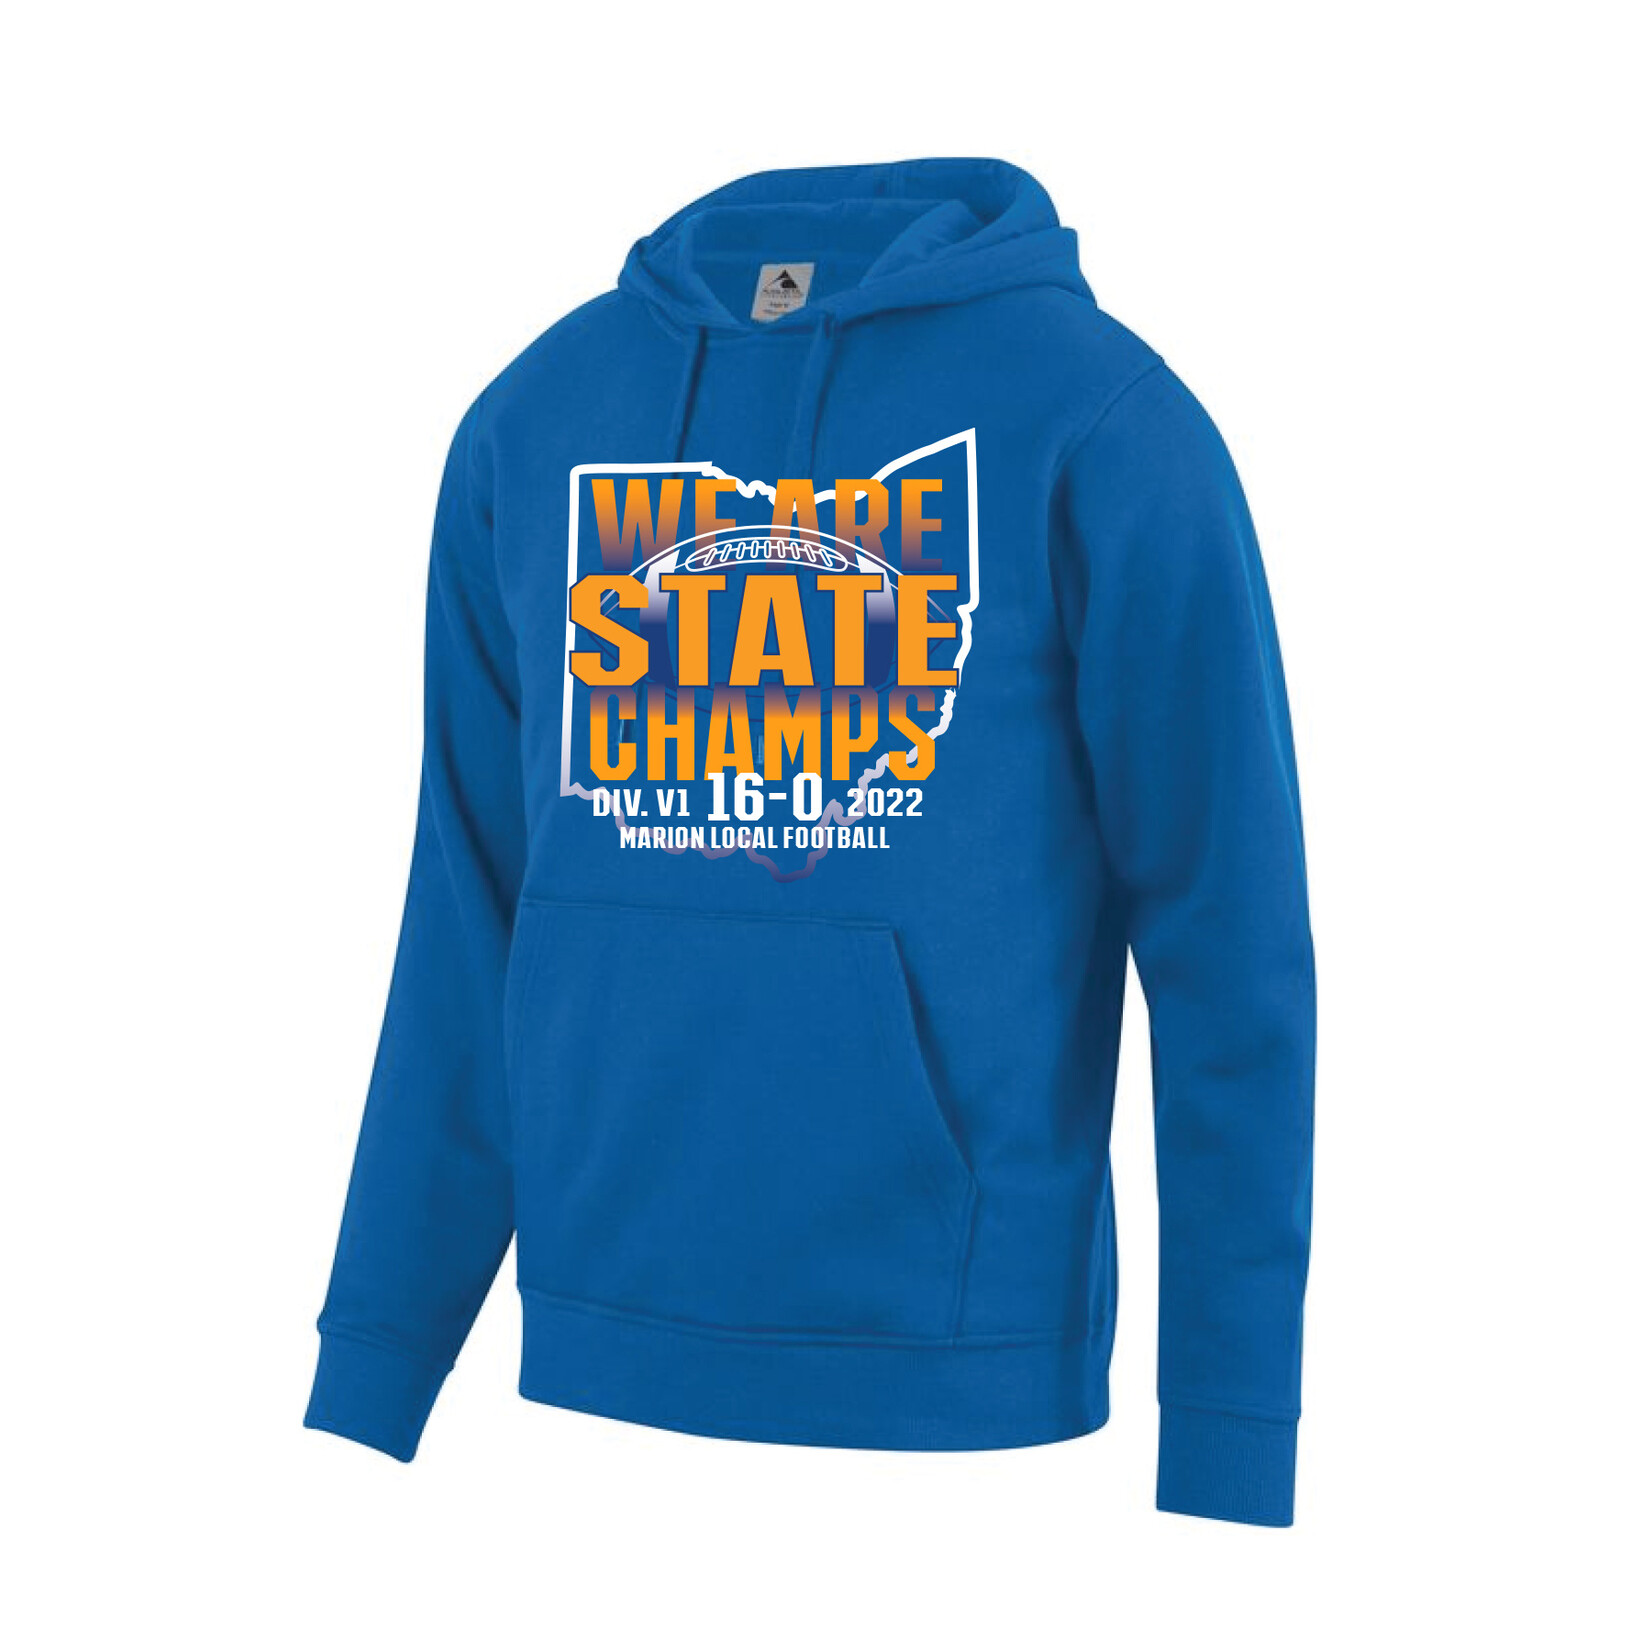 2022 State Champs YOUTH HOODED SWEATSHIRT